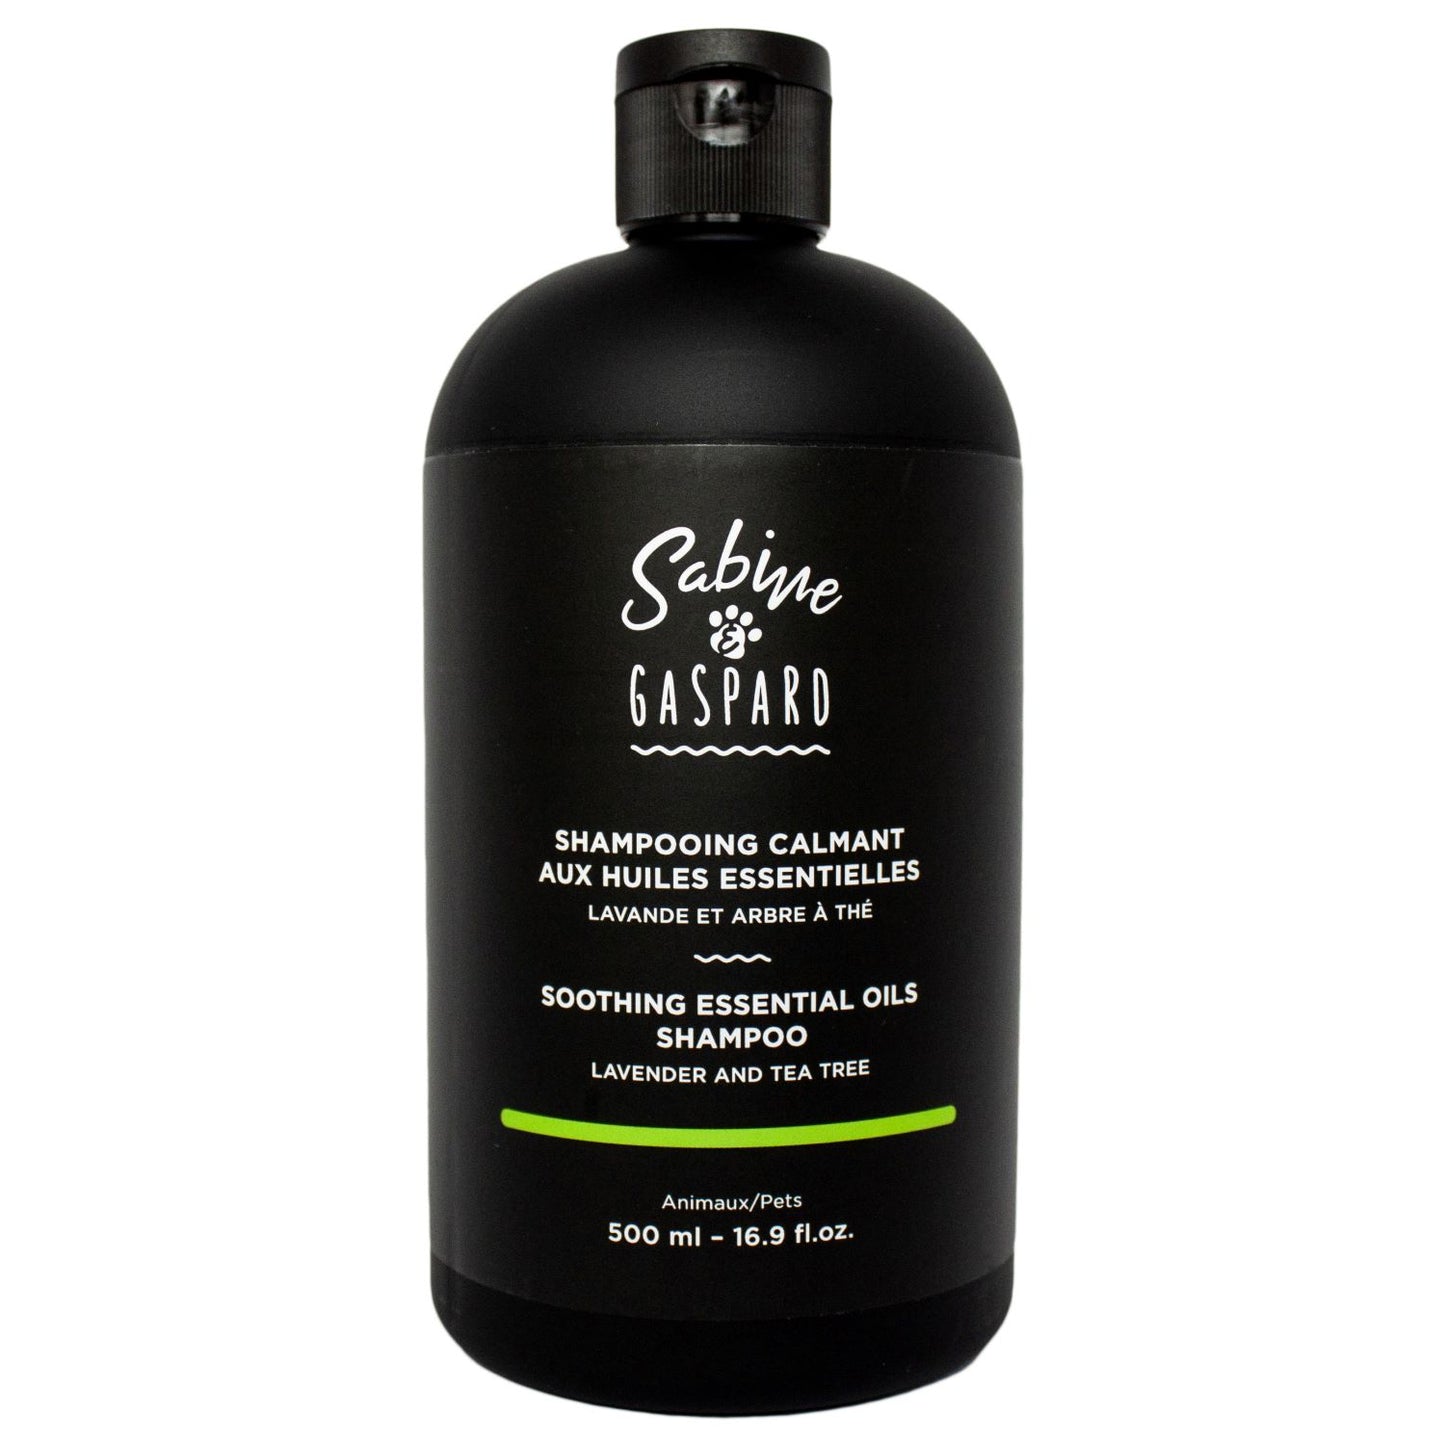 Calming Shampoo with Lavender and Tea Tree Essential Oils (without tears)